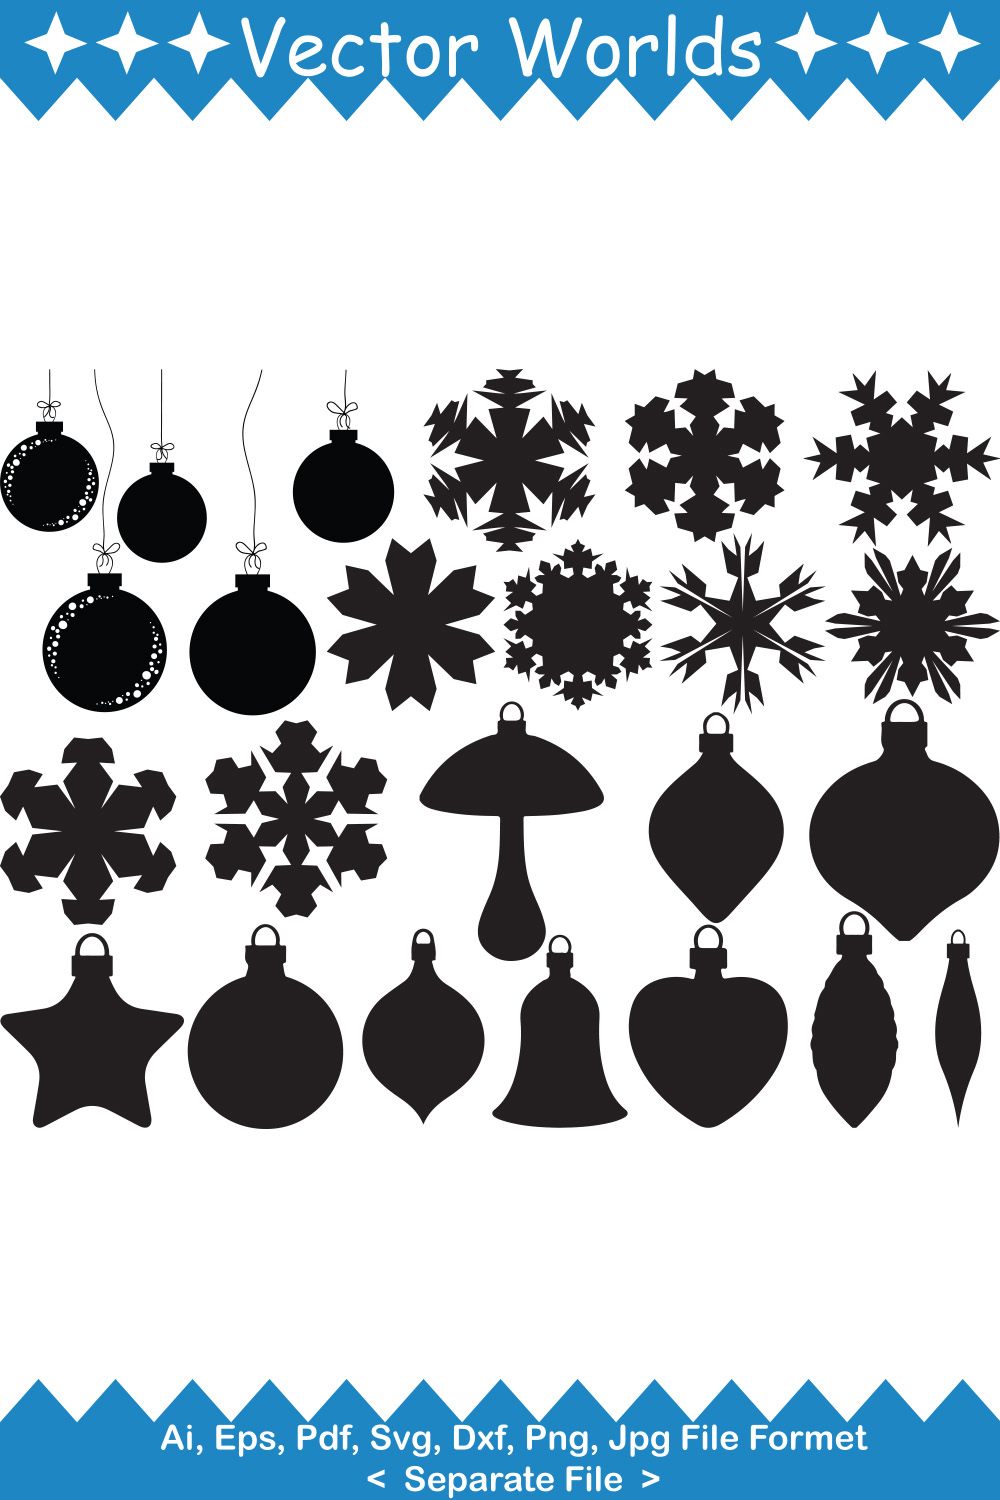 A selection of unique vector images of the silhouette of Christmas accessories.